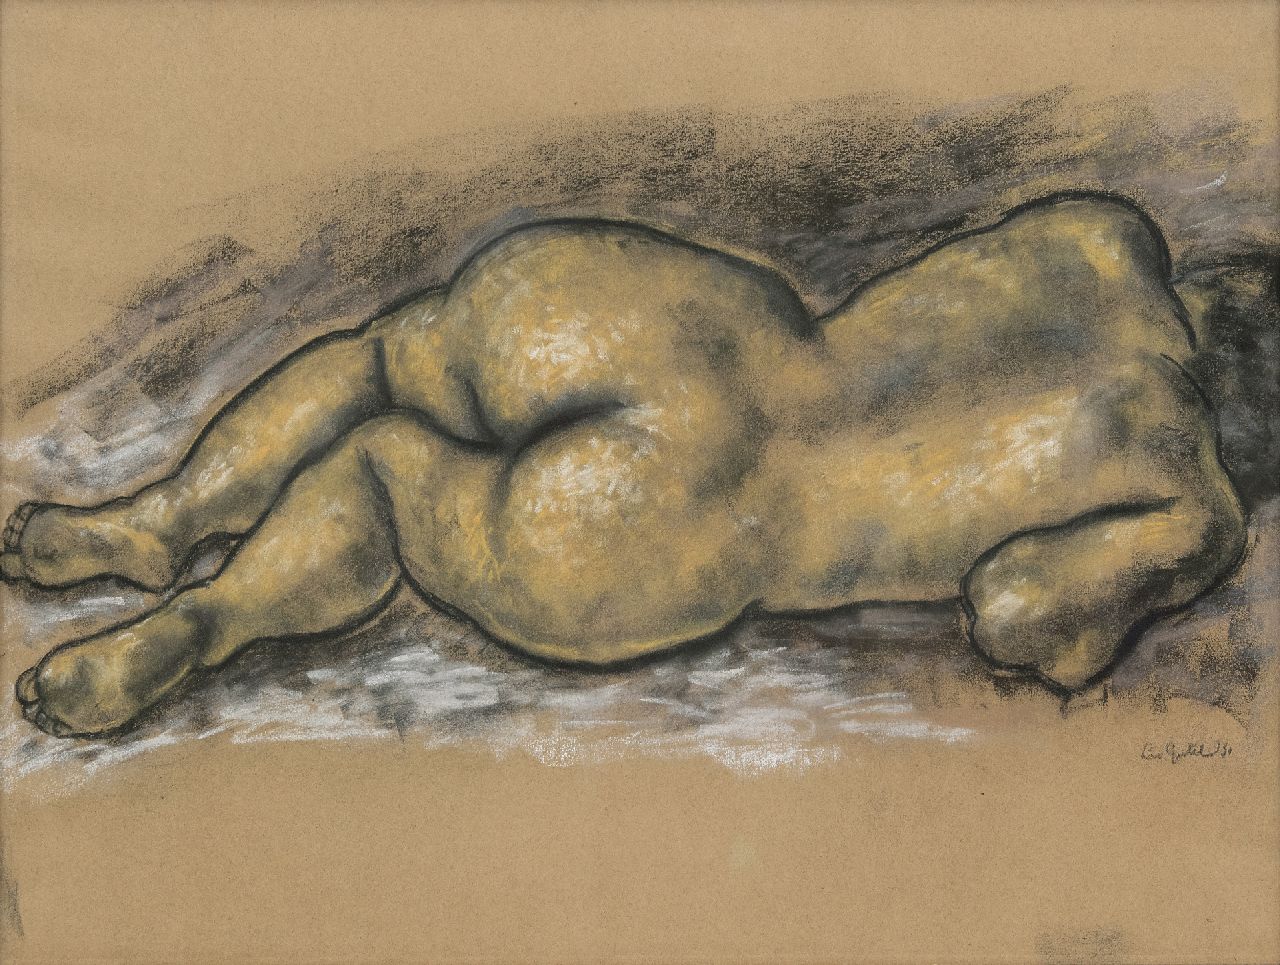 Gestel L.  | Leendert 'Leo' Gestel | Watercolours and drawings offered for sale | Reclining nude, charcoal and pastel on paper 47.0 x 62.5 cm, signed l.r. and dated '31